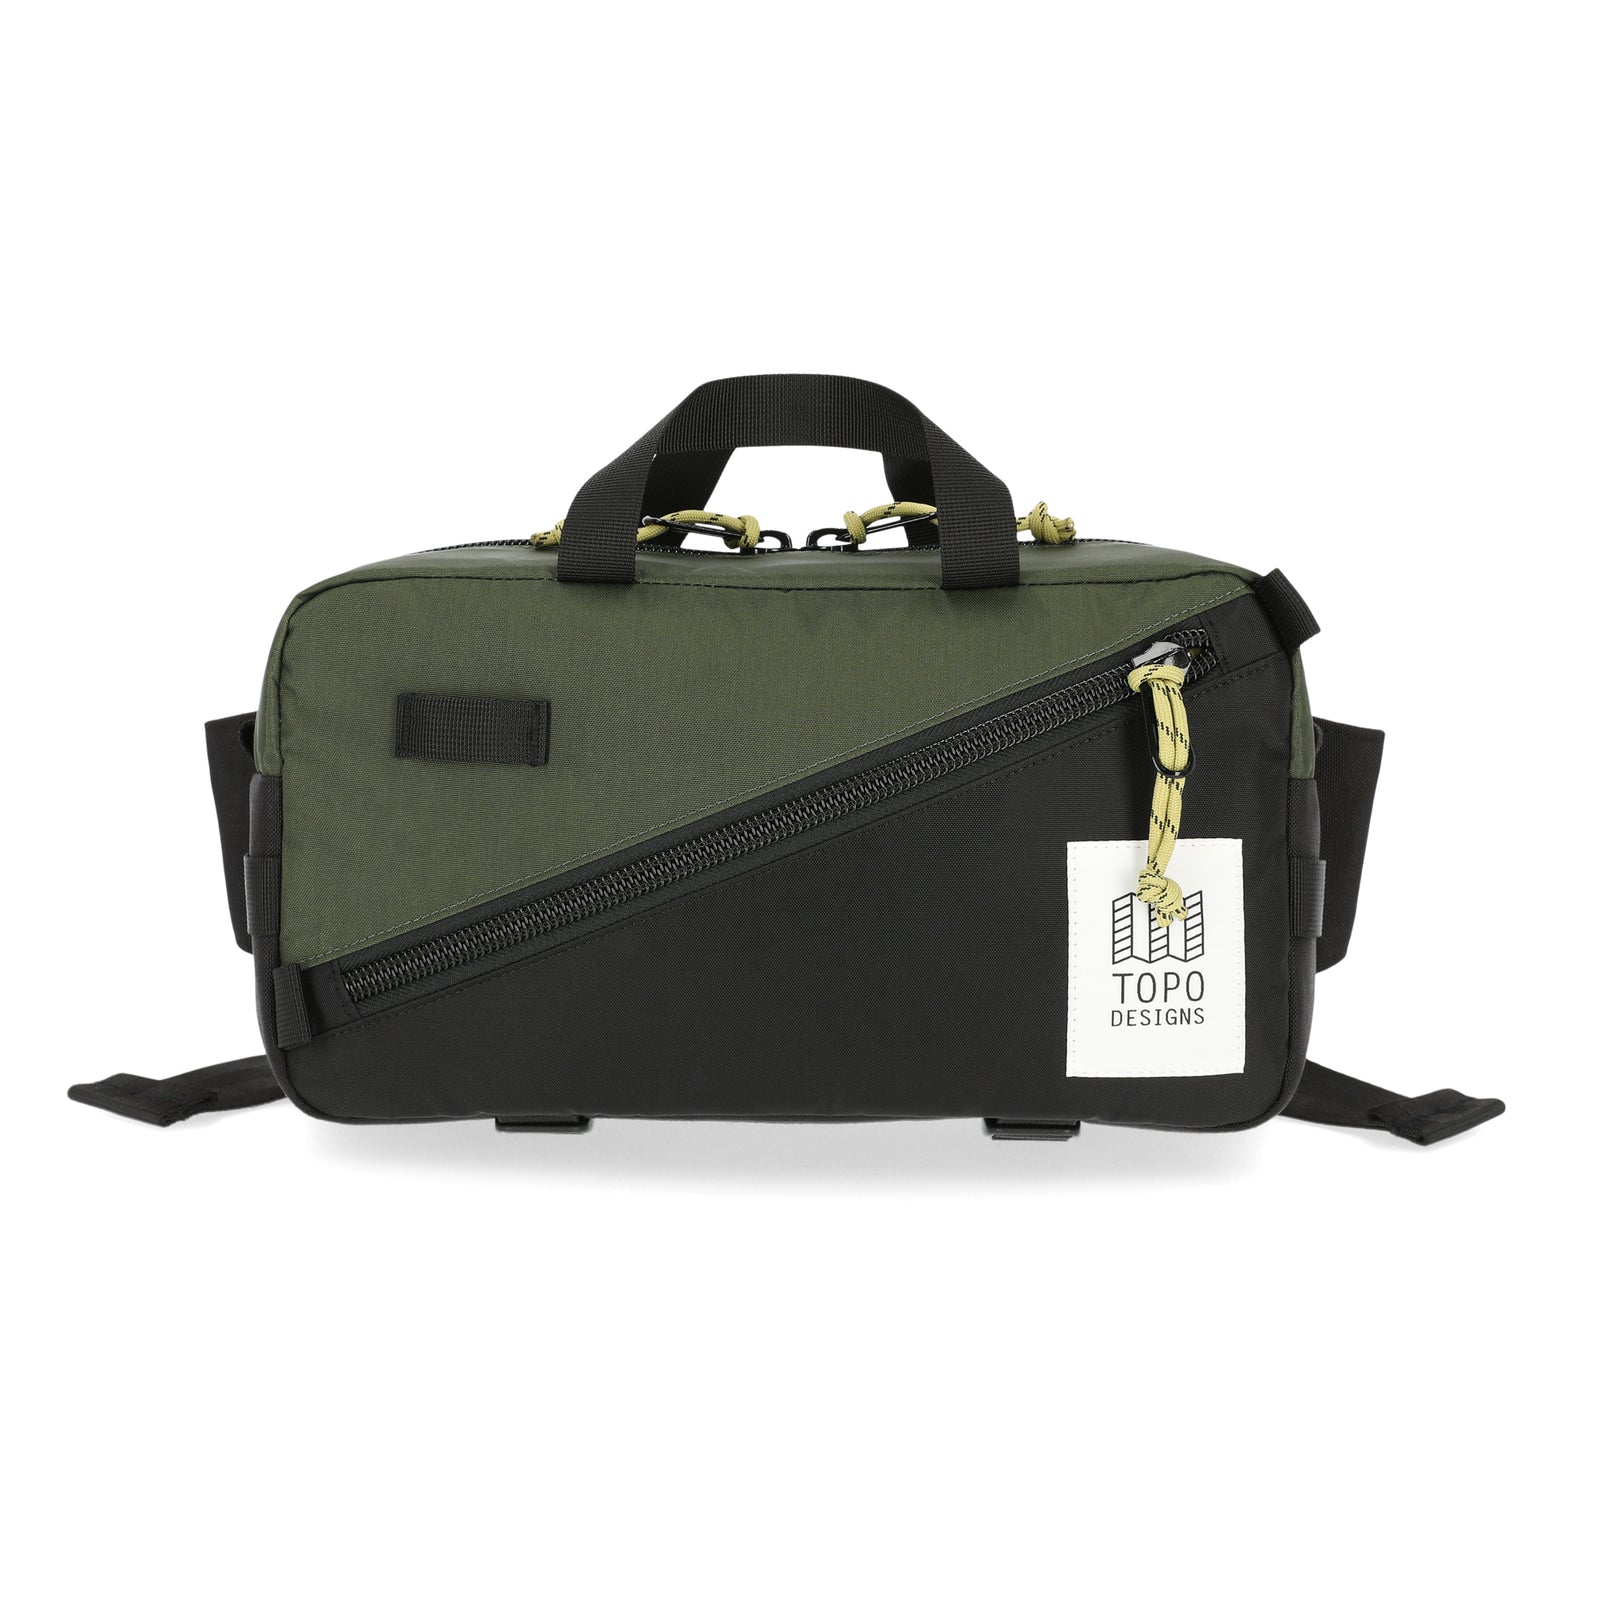 Topo Designs Quick Pack hip fanny pack in "Black / Olive" nylon.